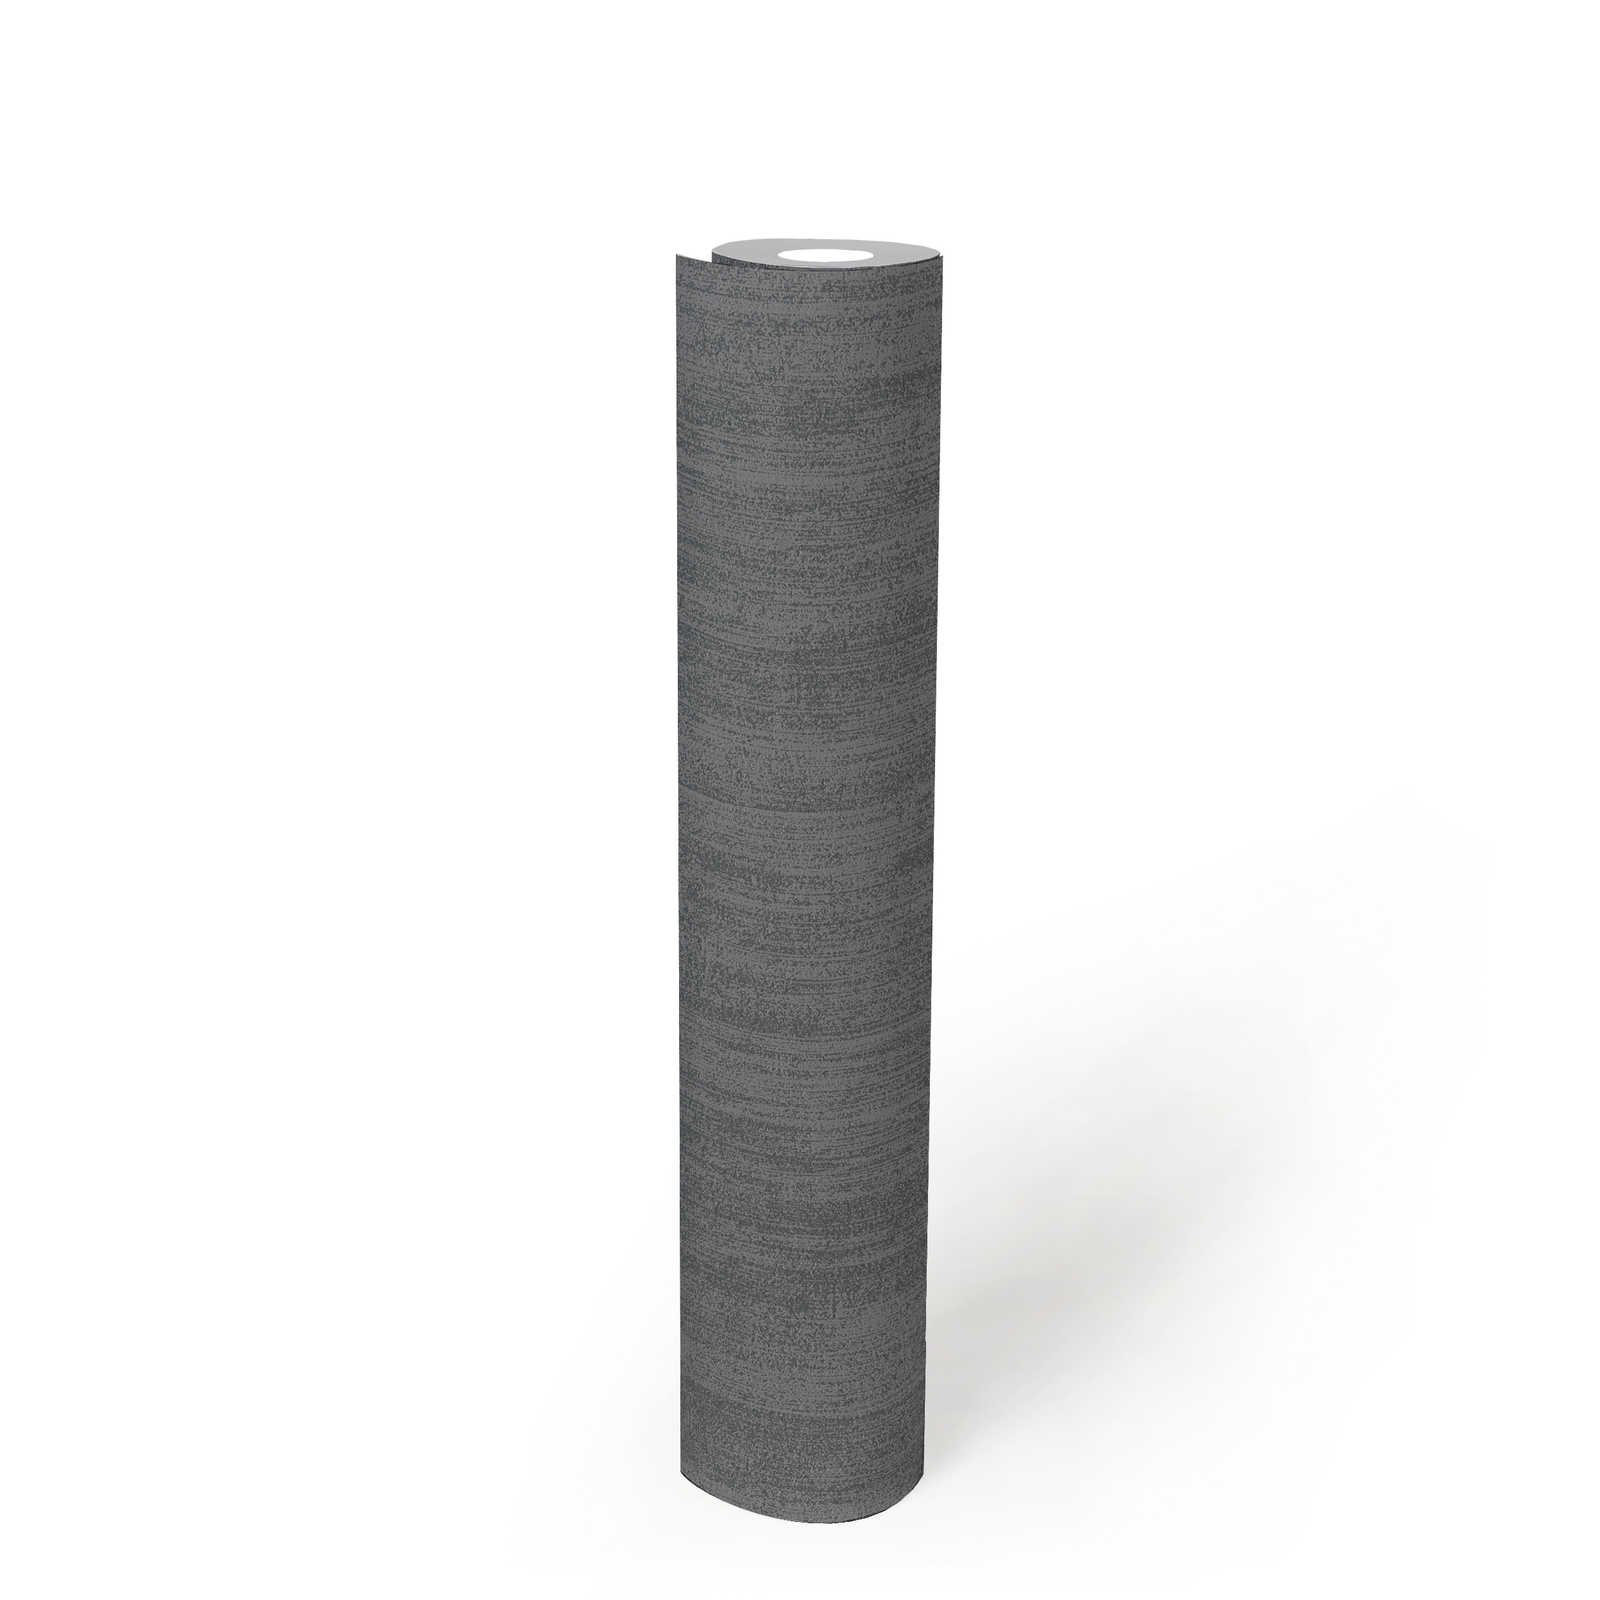             Plain non-woven wallpaper with tone-on-tone hatching - black
        